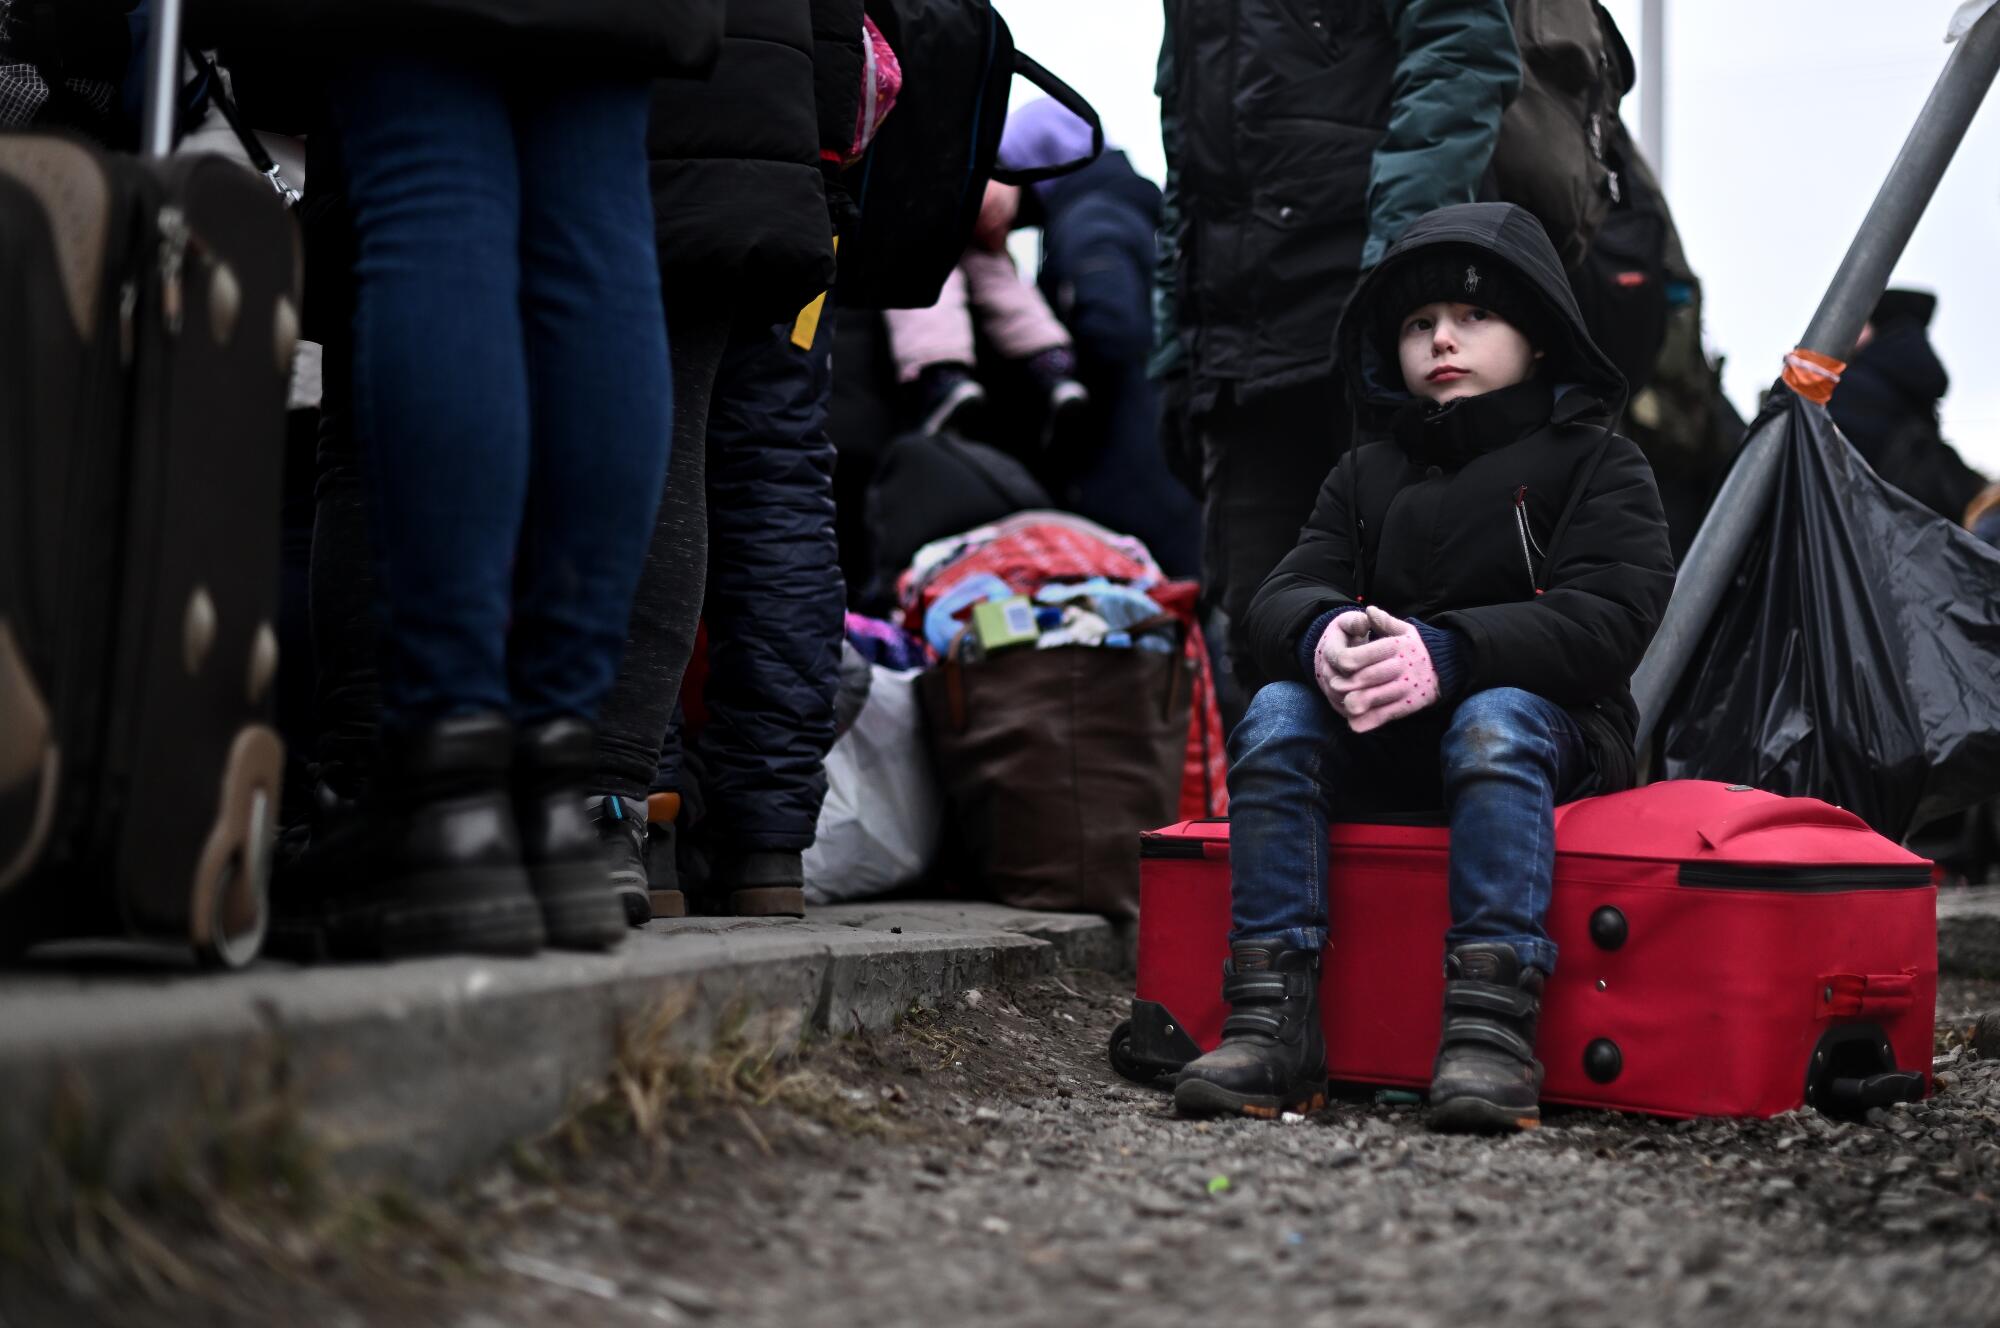 A young boy sits on a suitcase as Ukrainian refugees wait to be transported after crossing the border in Medyka, Poland.